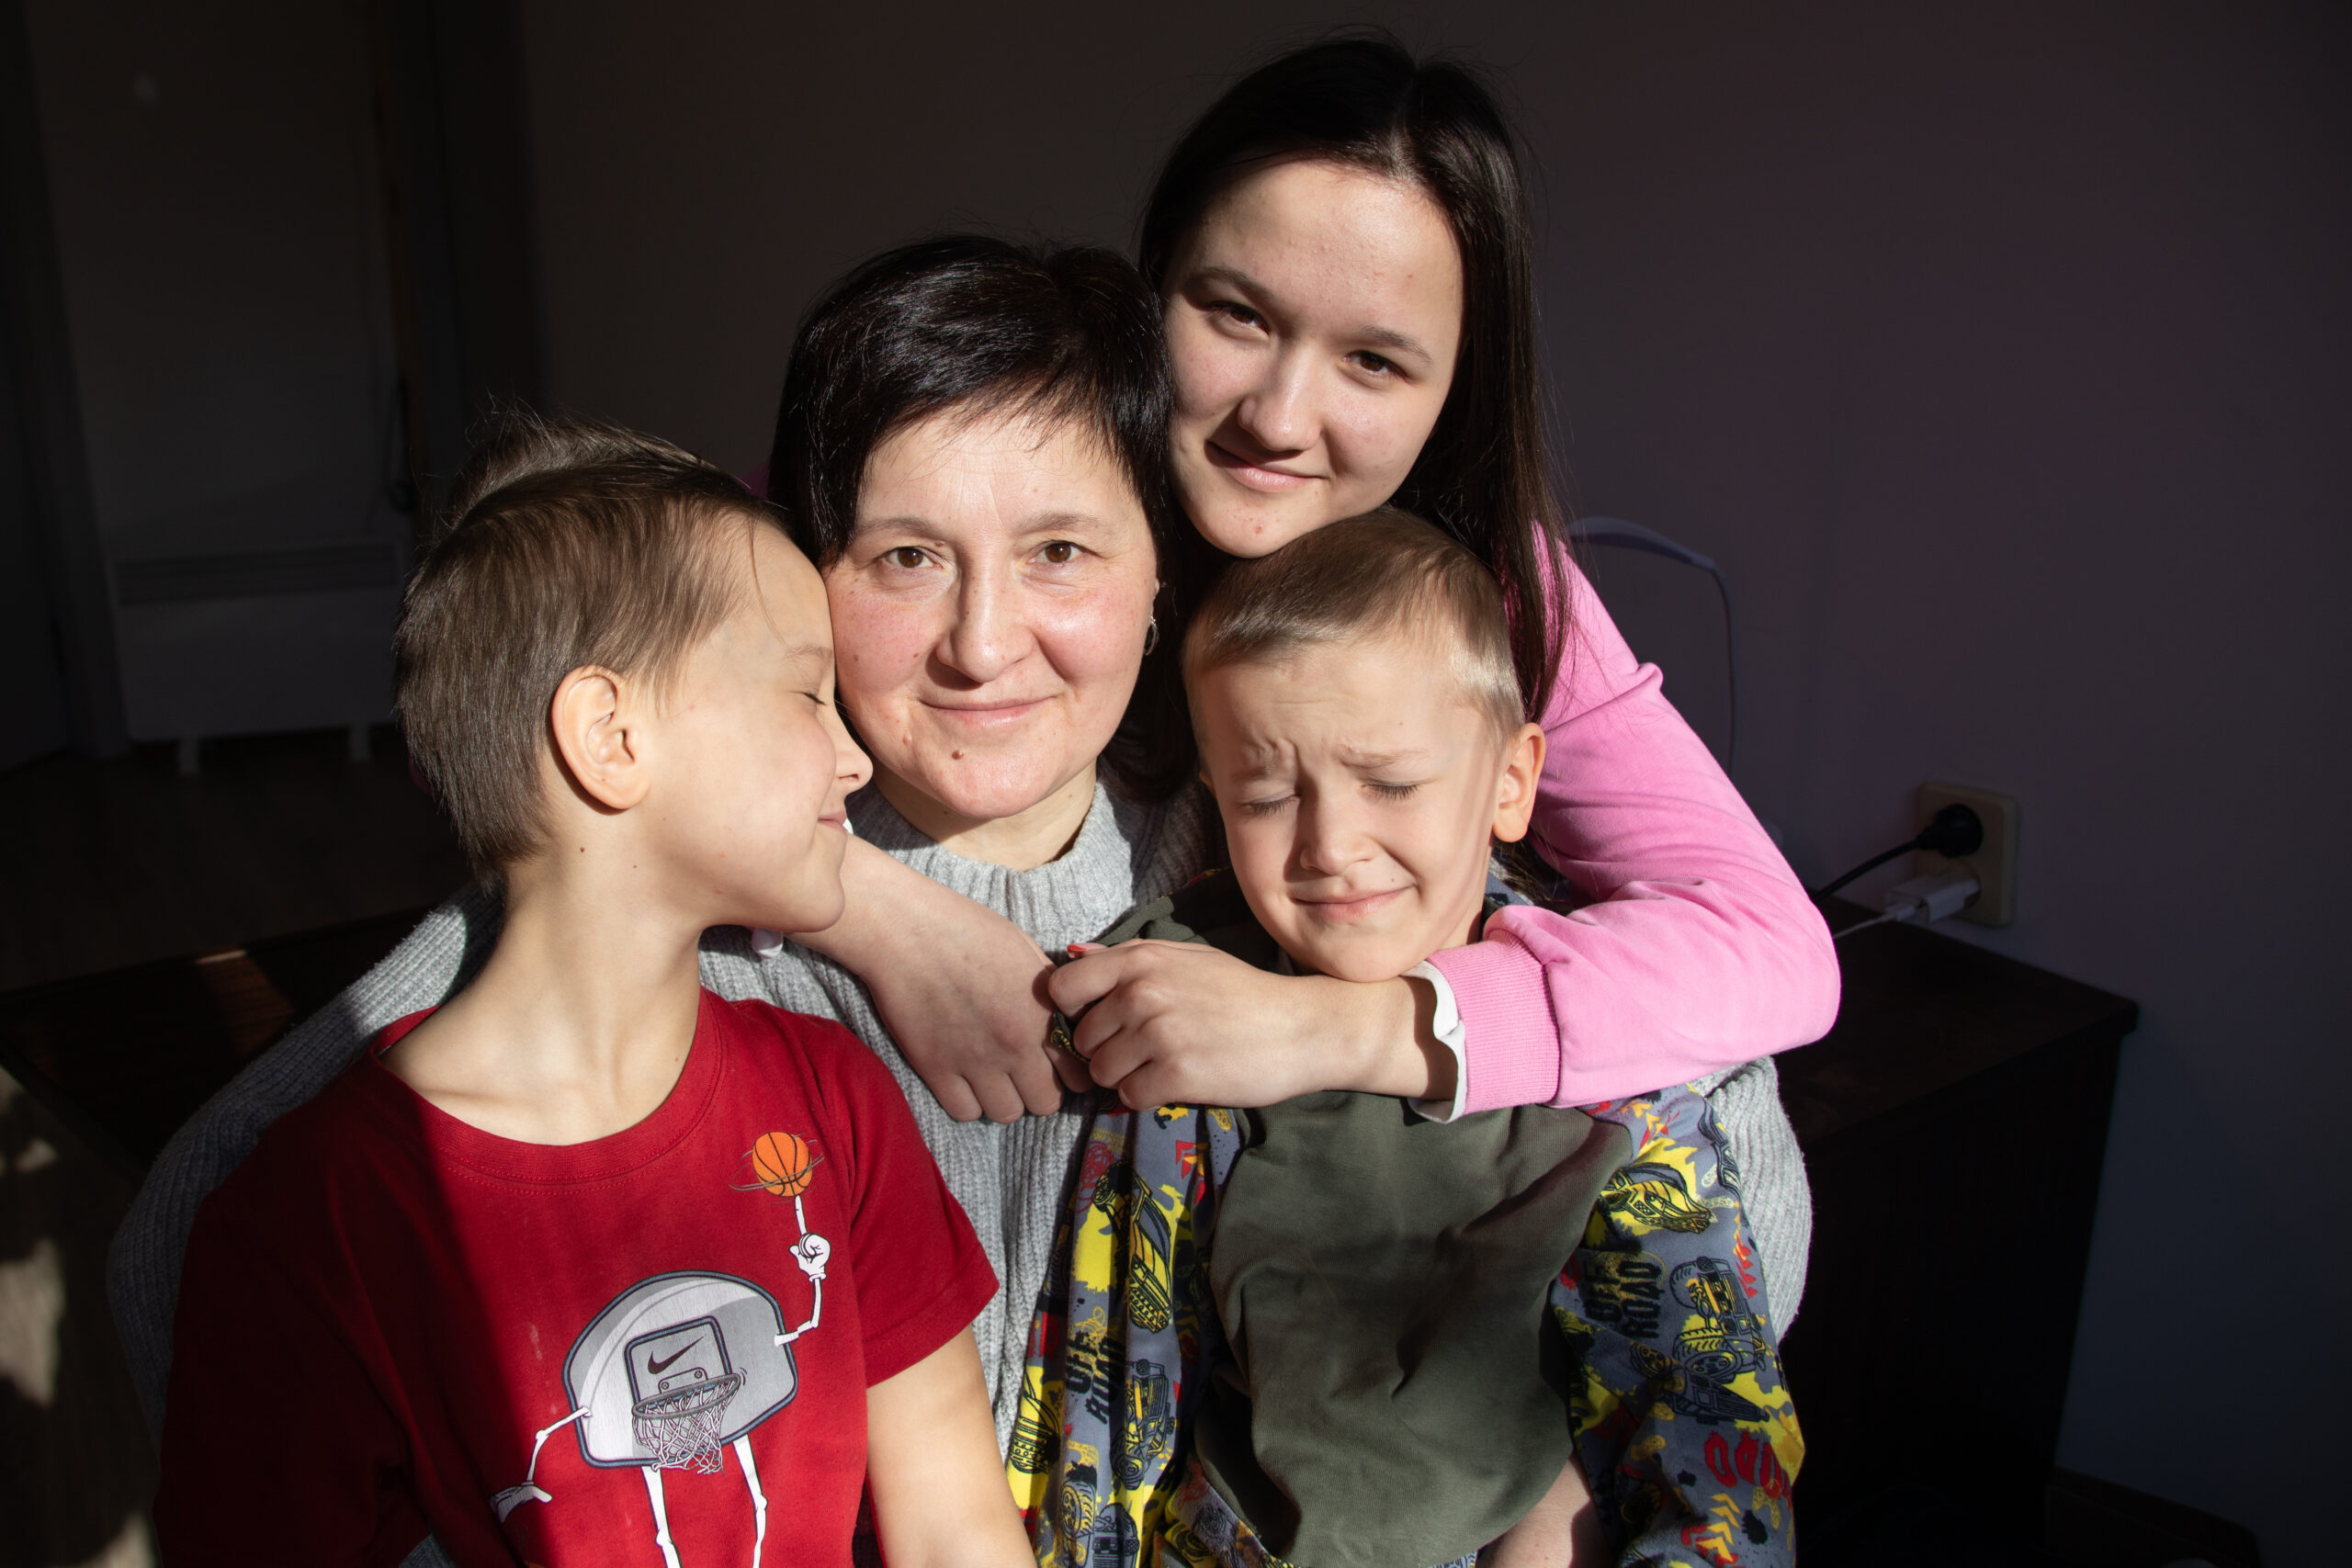 Ukrainian family poses for a photo inside their apartment funding through the Ukraine Humanitarian Fund